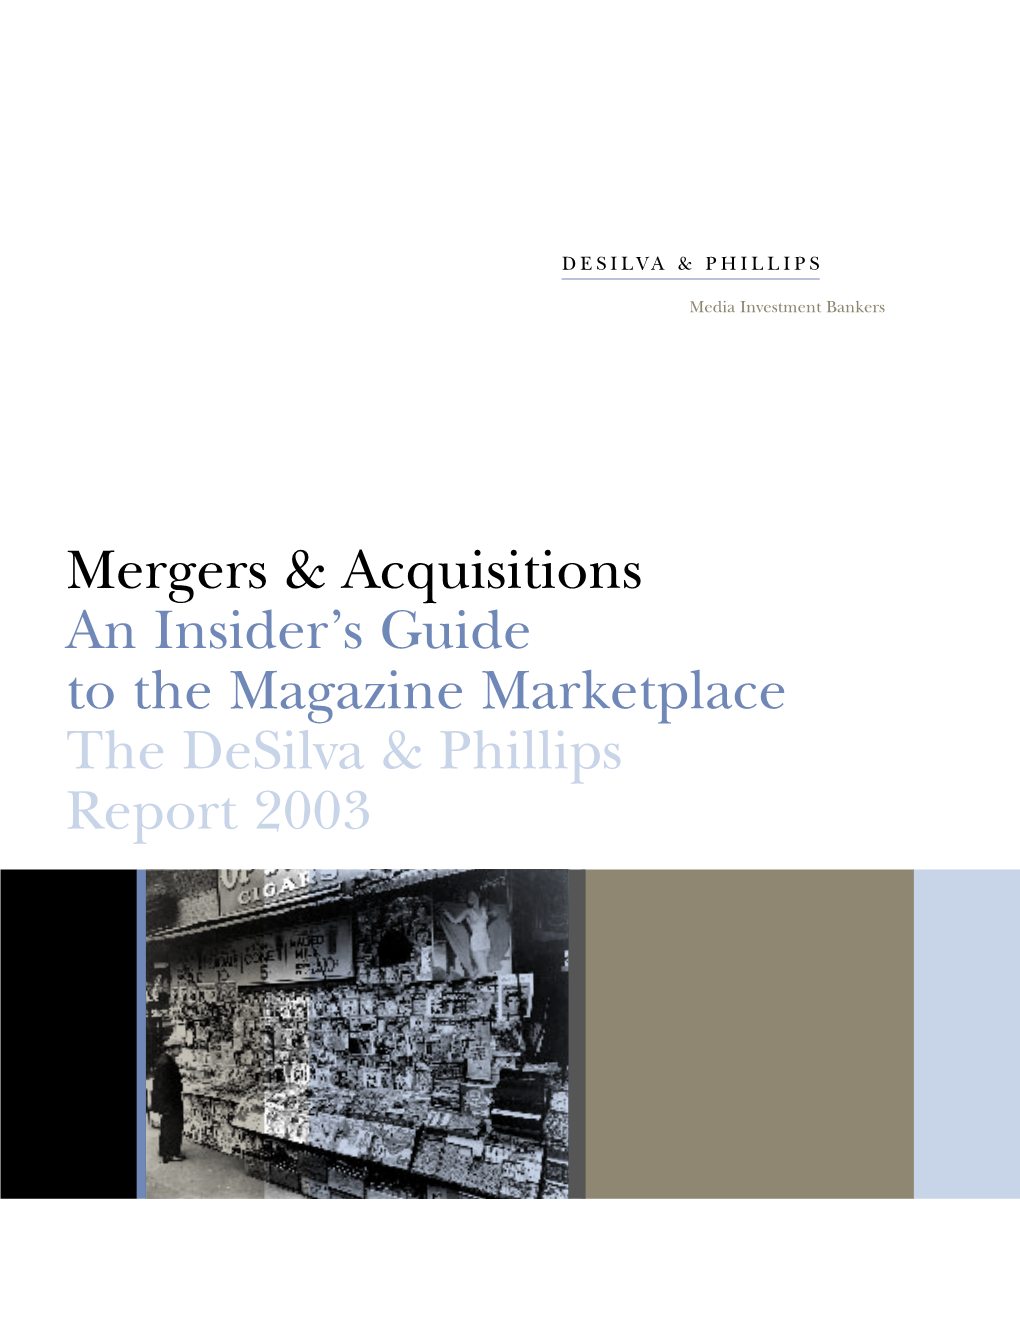 Mergers & Acquisitions an Insider's Guide to the Magazine Marketplace the Desilva & Phillips Report 2003